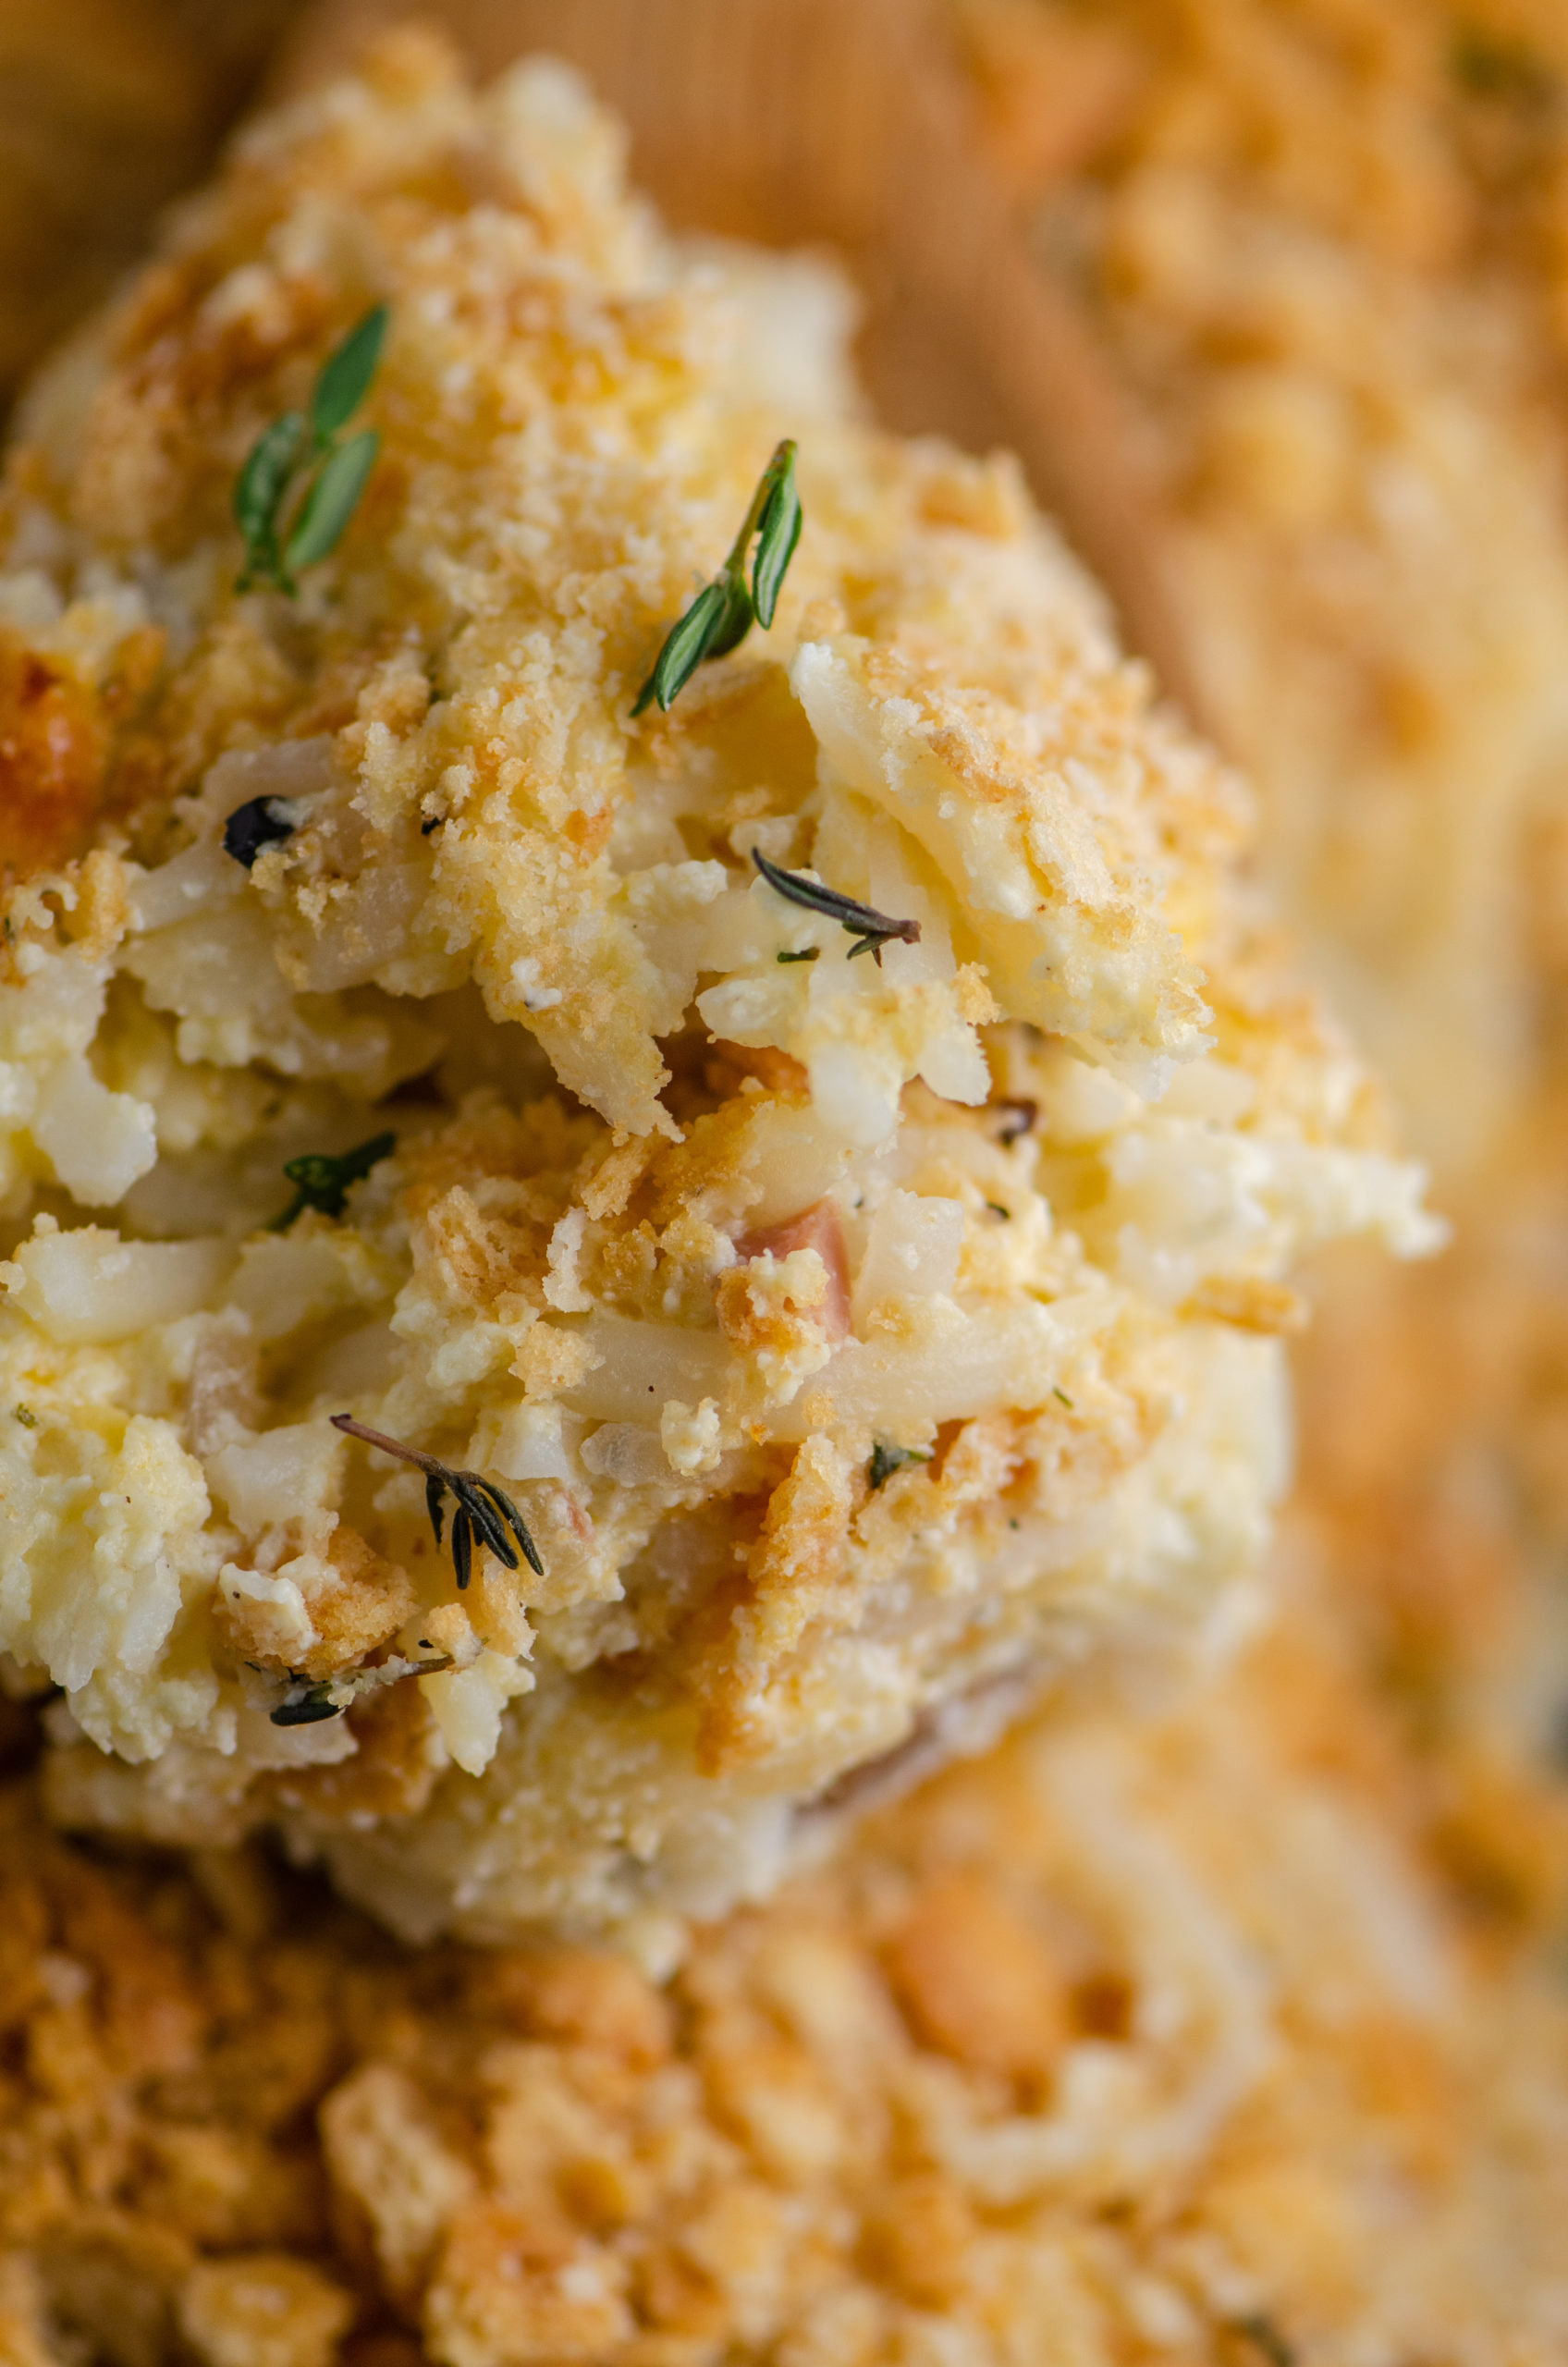 Spoonful of hashbrown casserole.  